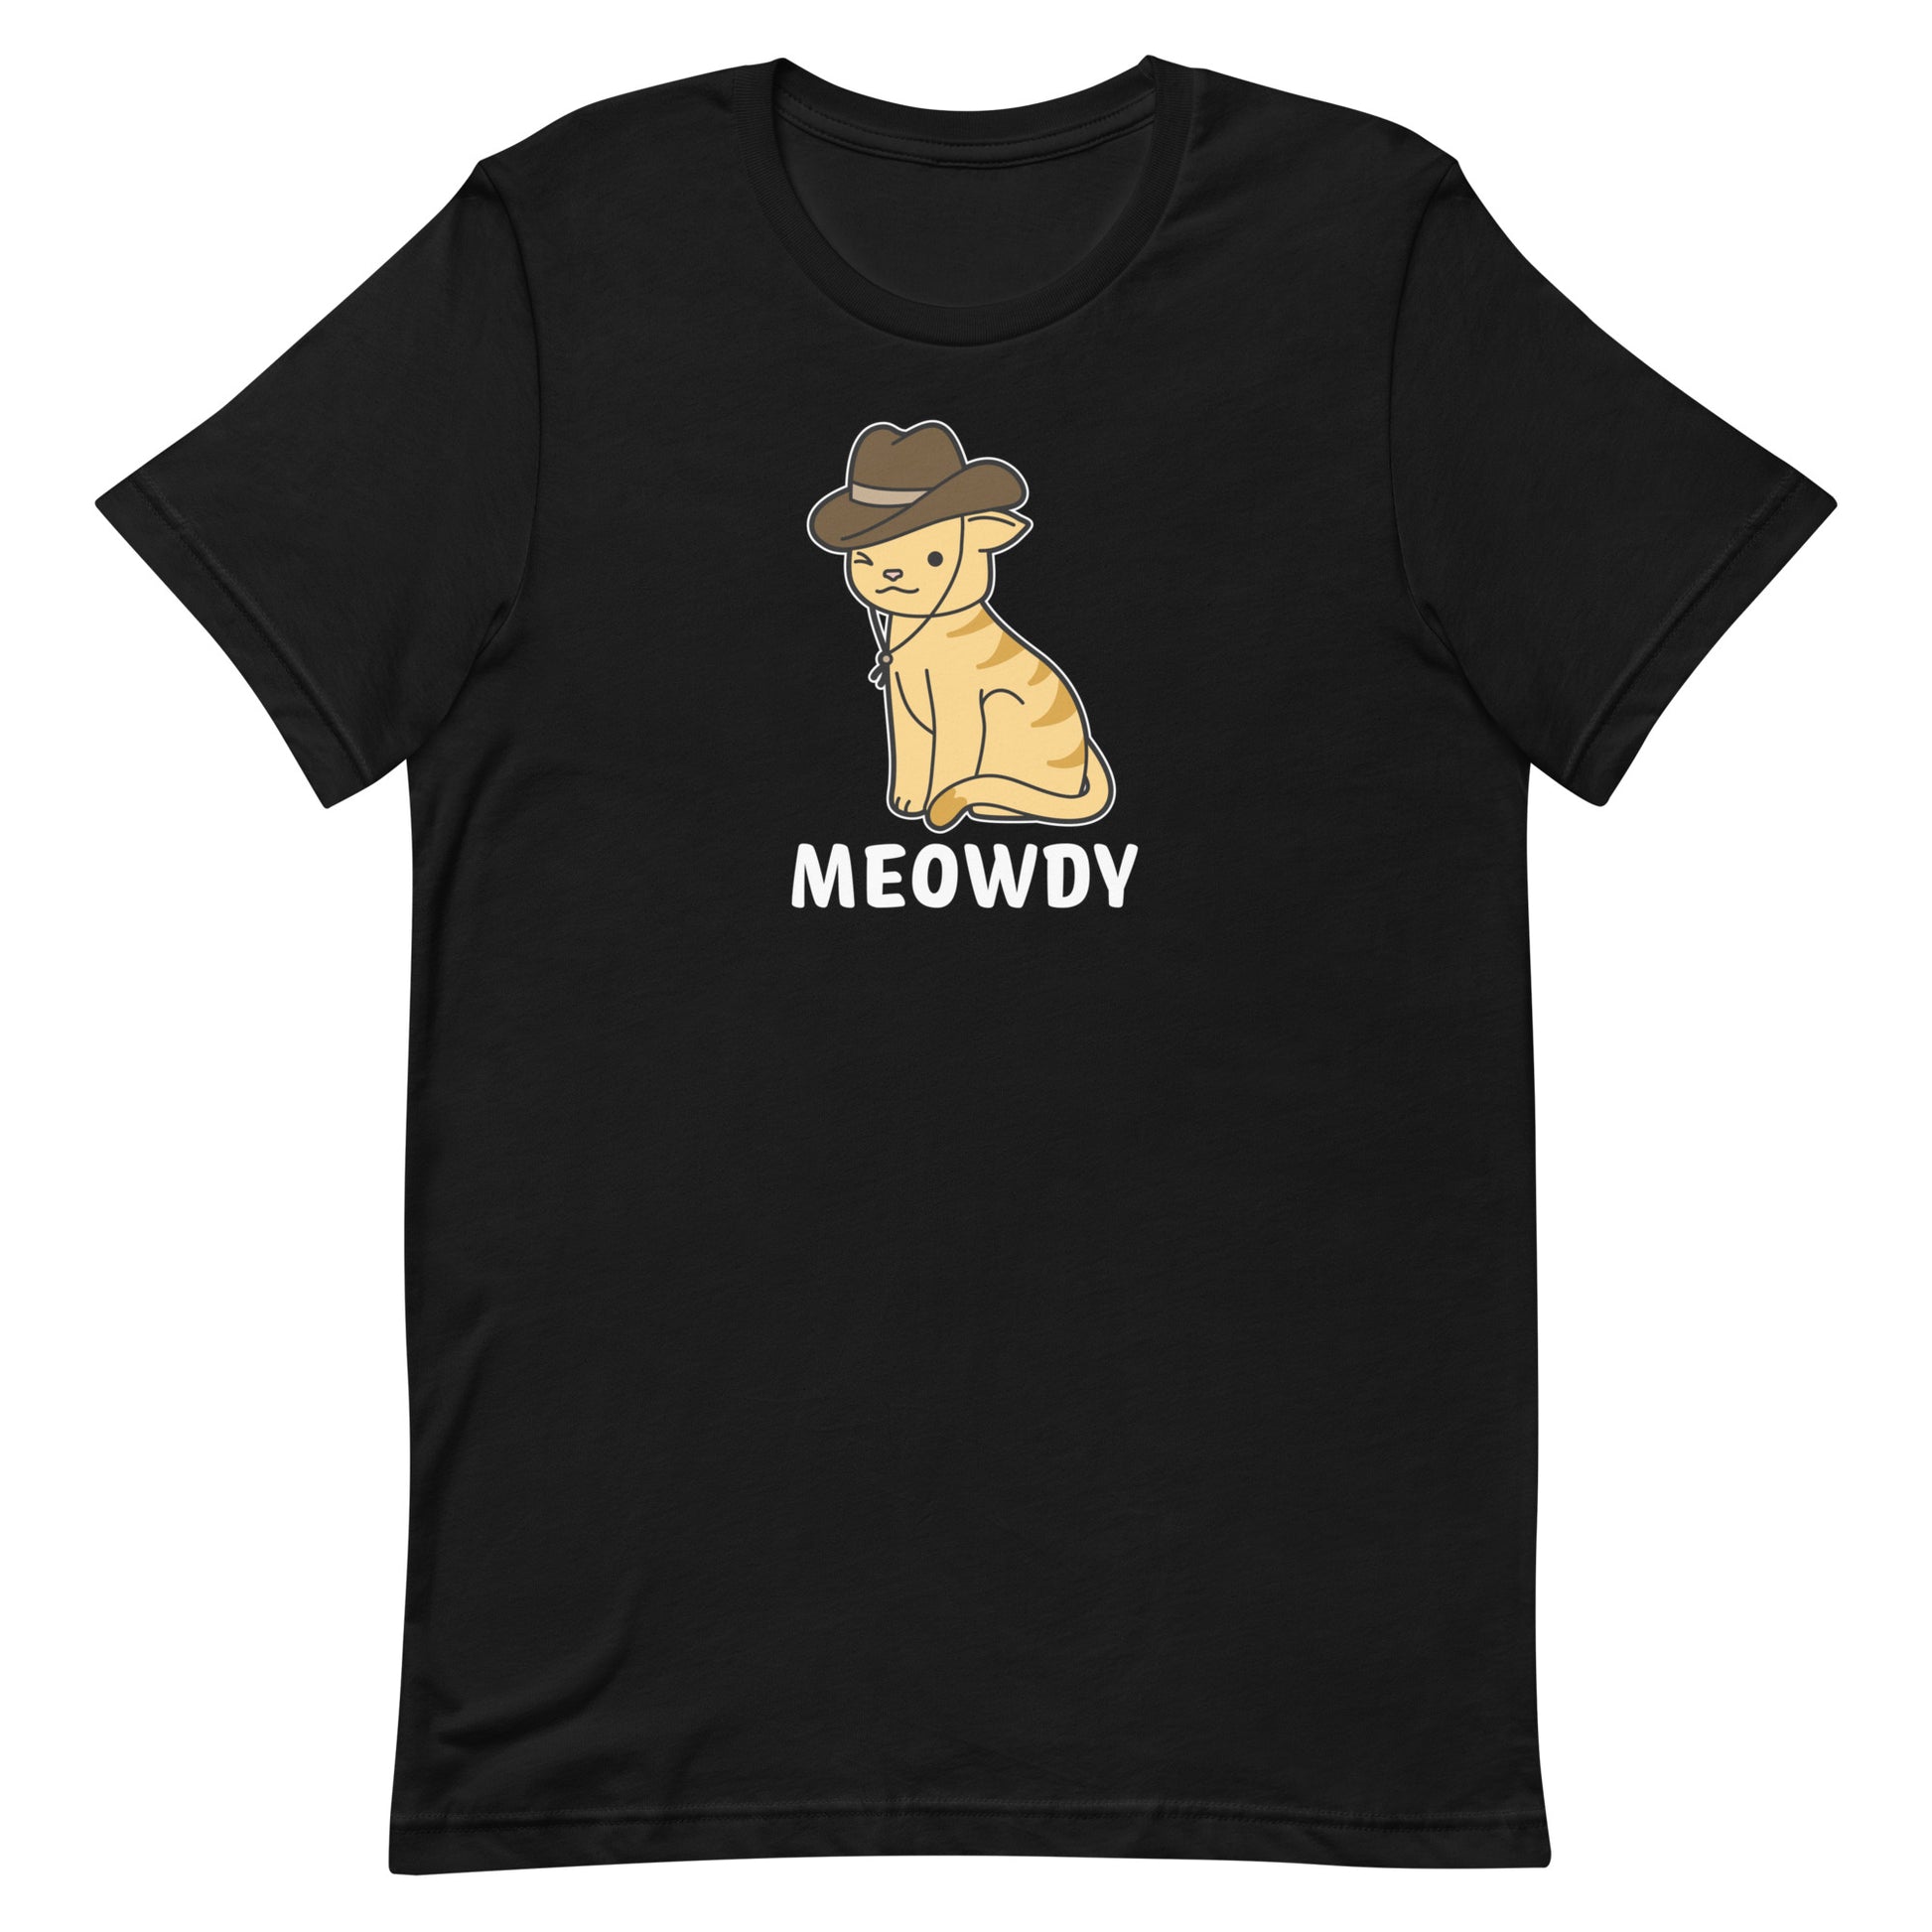 A black crewneck t-shirt featuring an illustration of an orange striped cat. The cat is winking at the viewer and wearing a cowboy hat. Text beneath him reads "Meowdy".